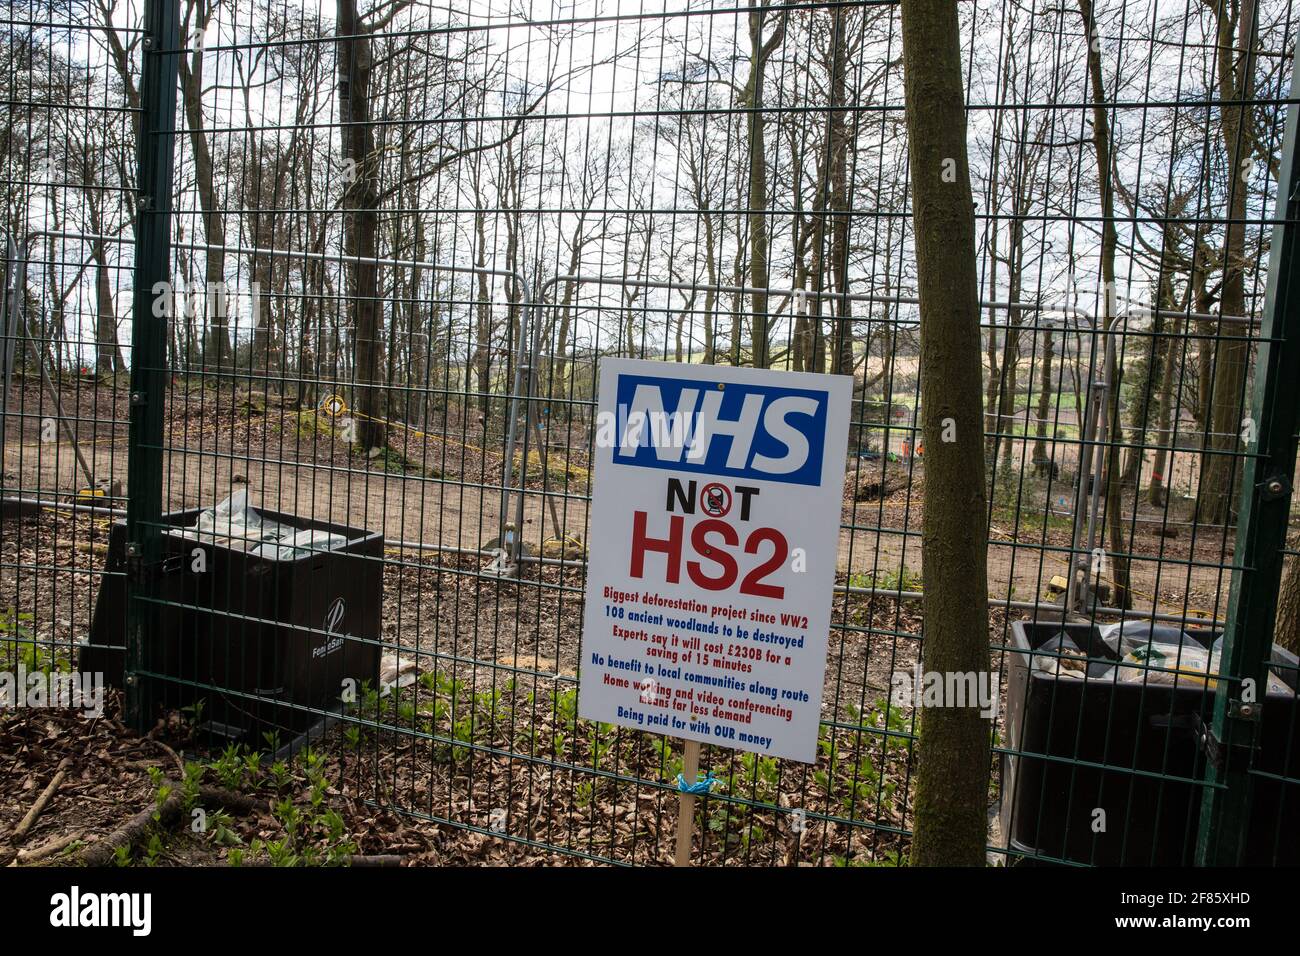 Wendover, UK. 9th April, 2021. A NHS Not HS2 placard is pictured during tree felling operations for the HS2 high-speed rail link in Jones Hill Wood, ancient woodland said to have inspired Roald Dahl. Tree felling work began this week, in spite of the presence of resting places and/or breeding sites for pipistrelle, barbastelle, noctule, brown long-eared and natterer's bats, following the issuing of a bat licence to HS2's contractors by Natural England on 30th March. Credit: Mark Kerrison/Alamy Live News Stock Photo